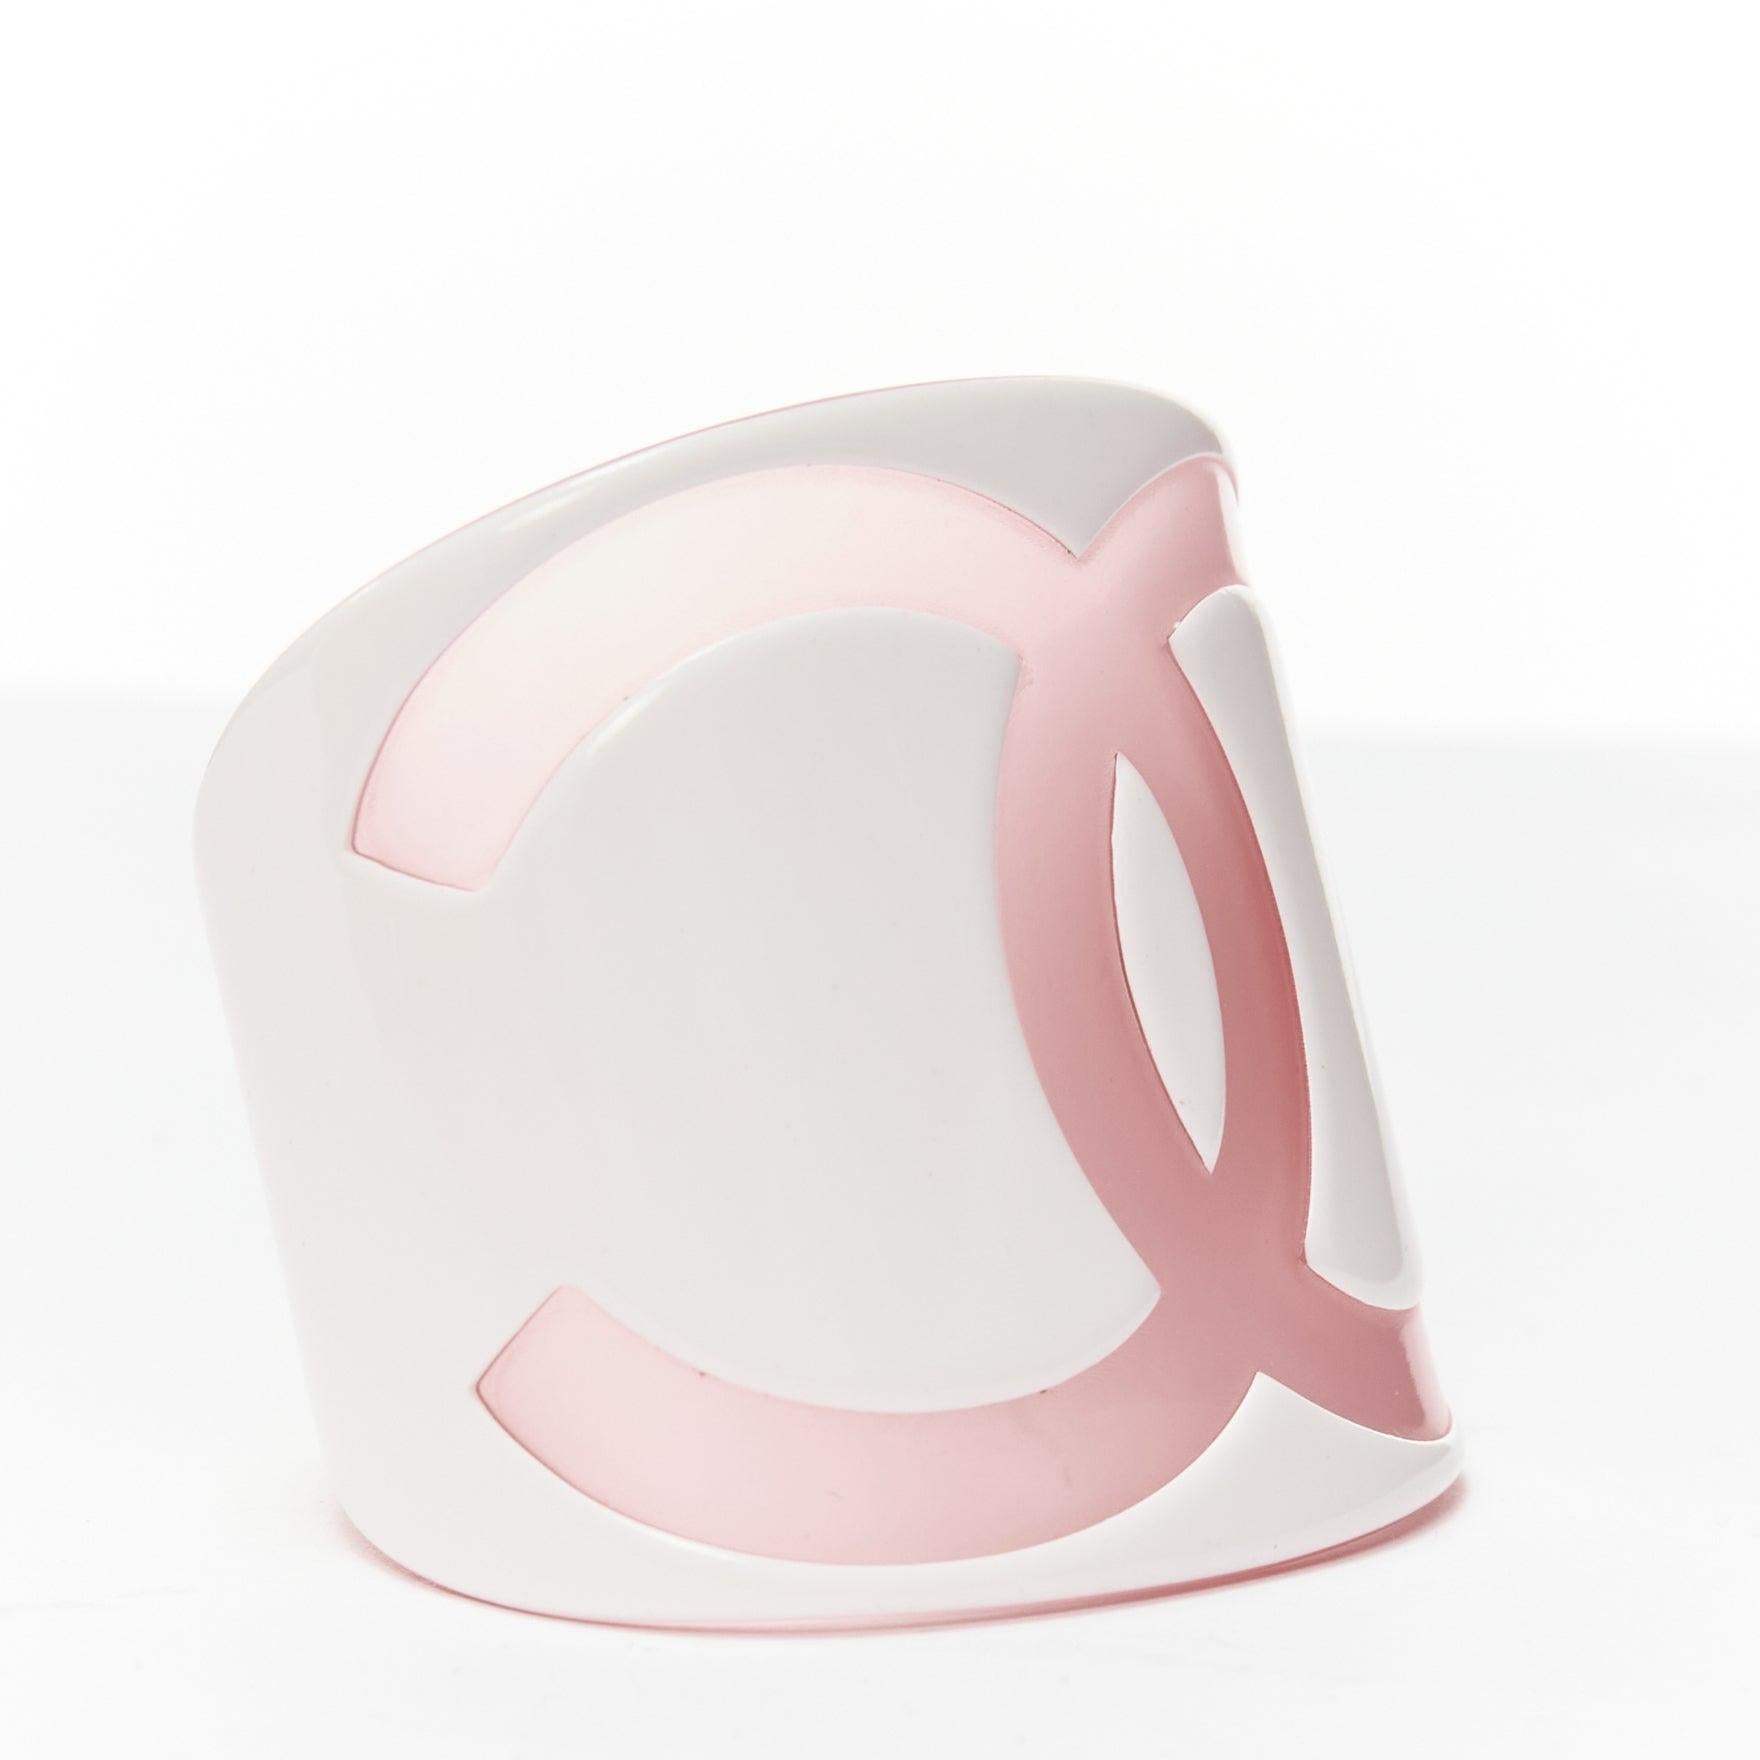 CHANEL Karl Lagerfeld 03P pink white giant CC logo resin bangle bracelet
Reference: TGAS/D00987
Brand: Chanel
Designer: Karl Lagerfeld
Collection: 03P
Material: Resin
Color: White, Pink
Pattern: Solid
Closure: Slip On
Lining: Pink
Extra Details: